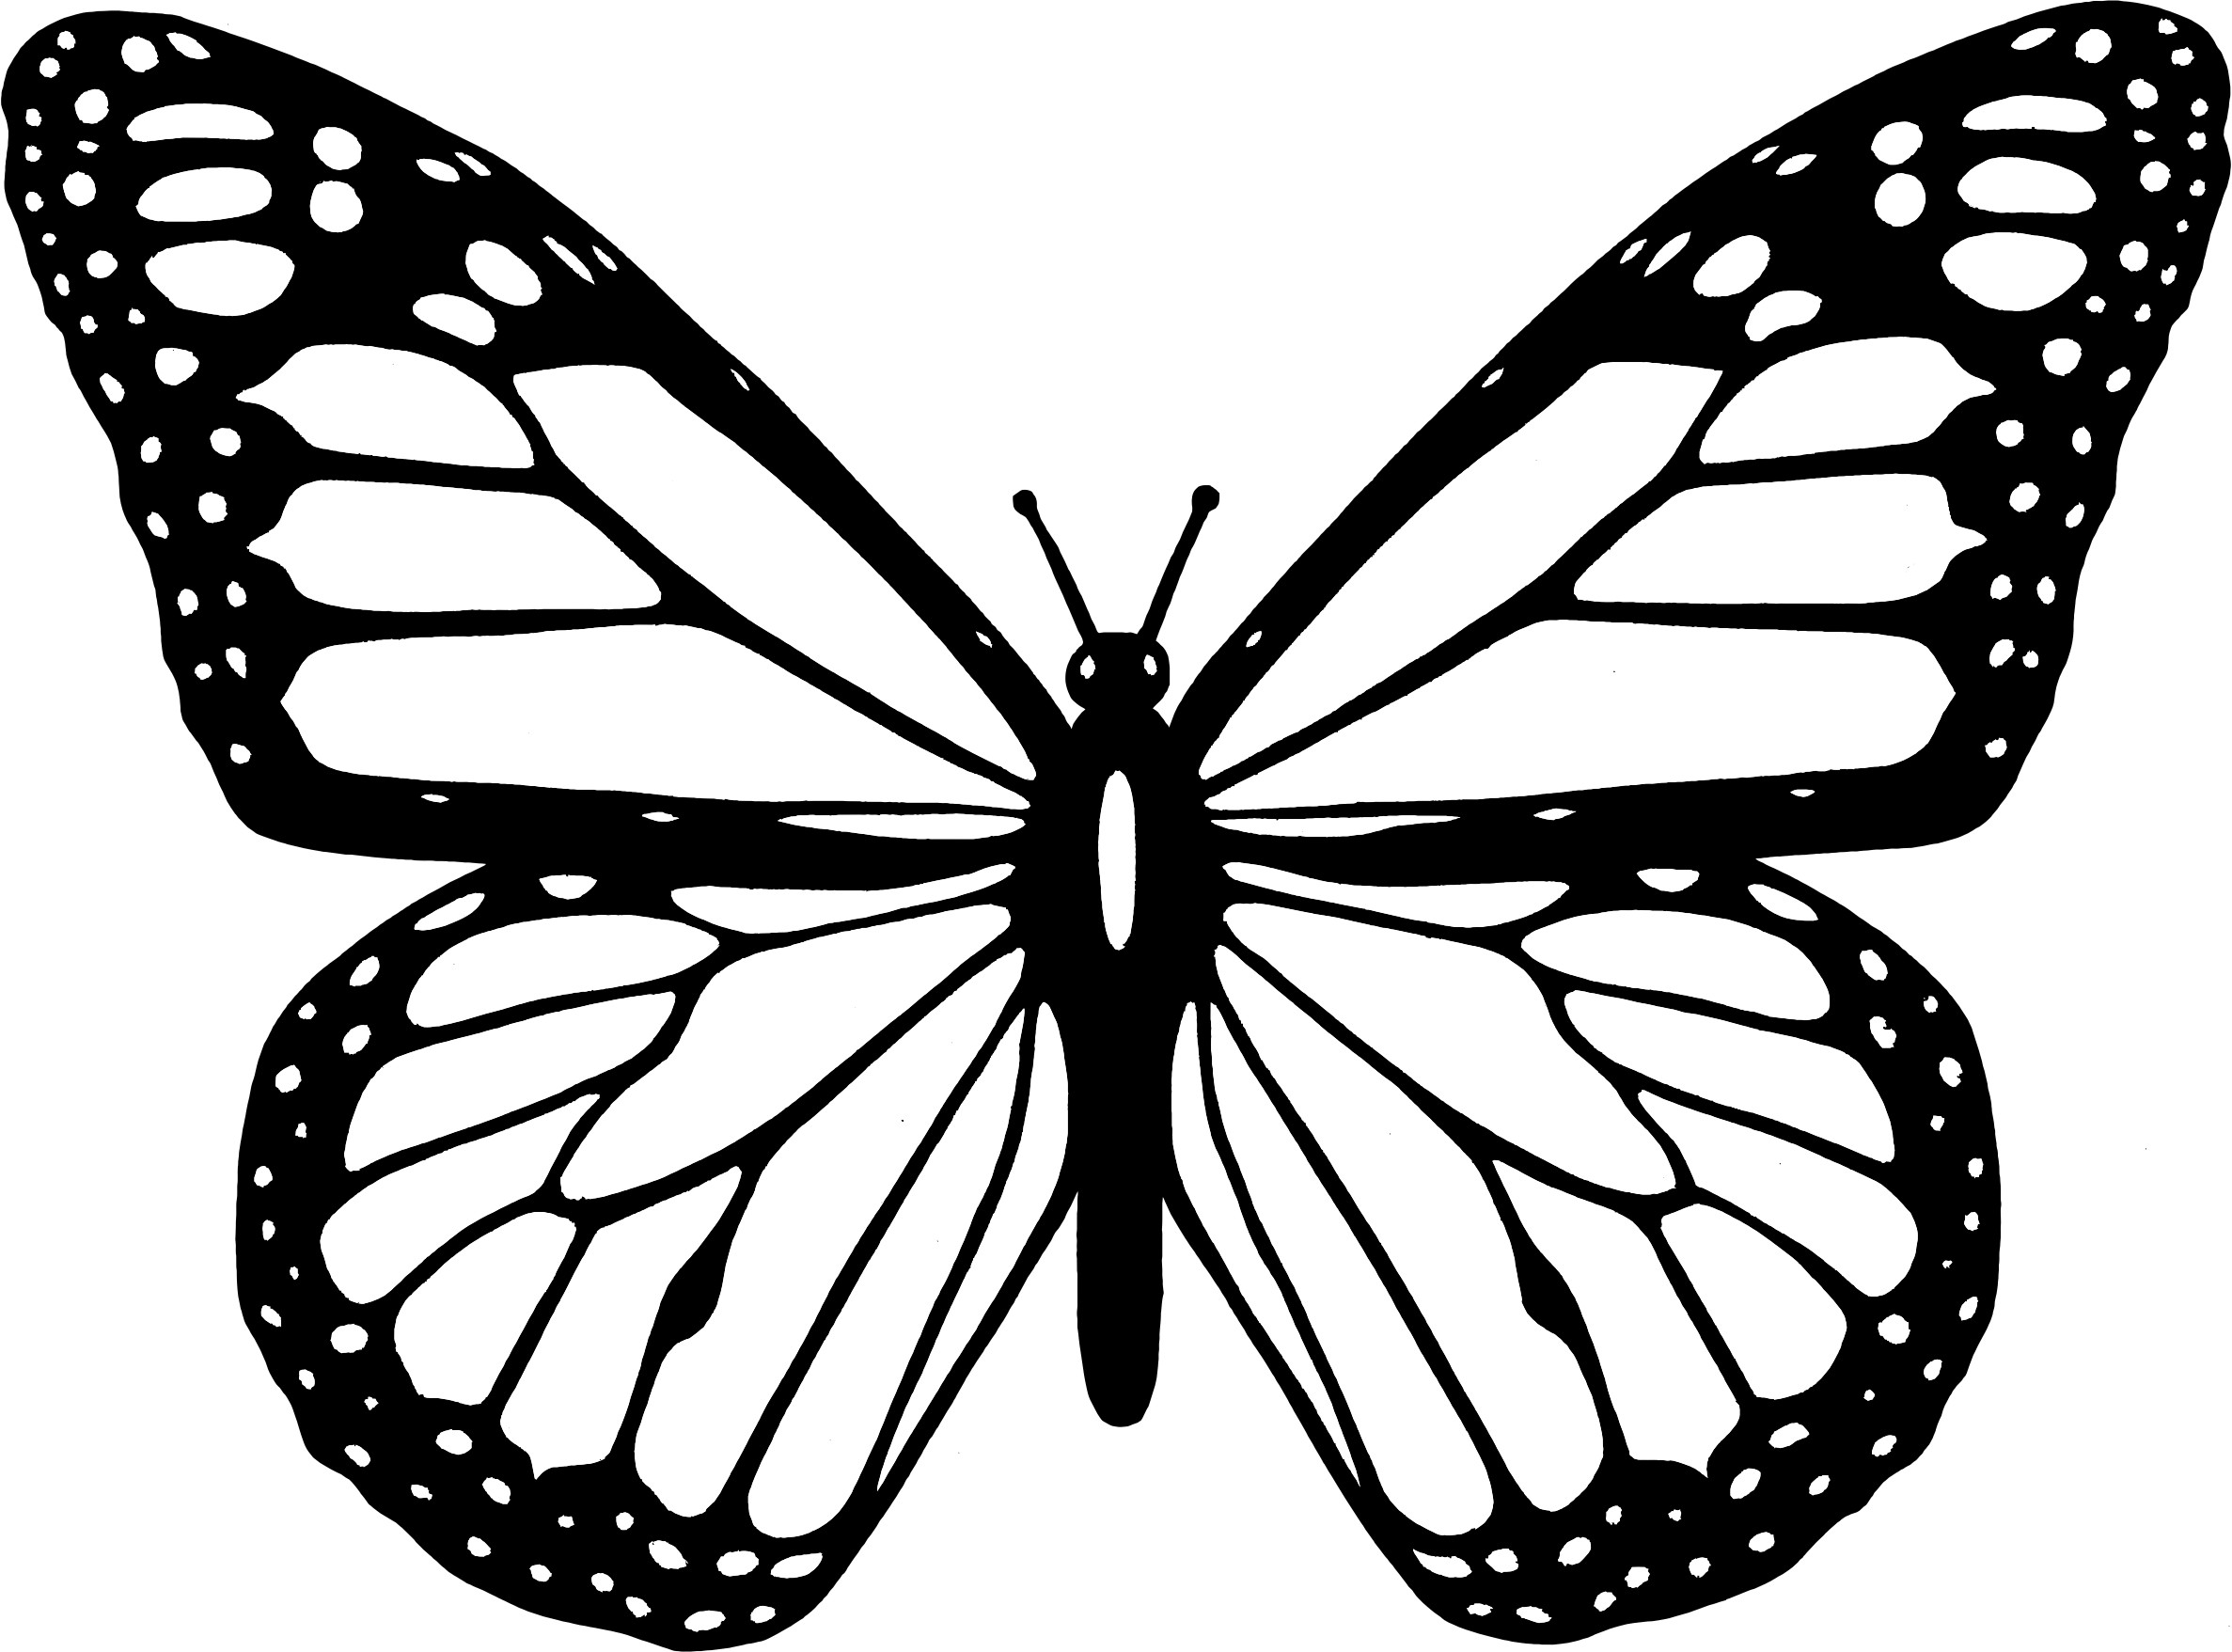 Monarch Butterfly Coloring Page Beautiful Monarch Butterfly Coloring Pages For Kids Bleupnr